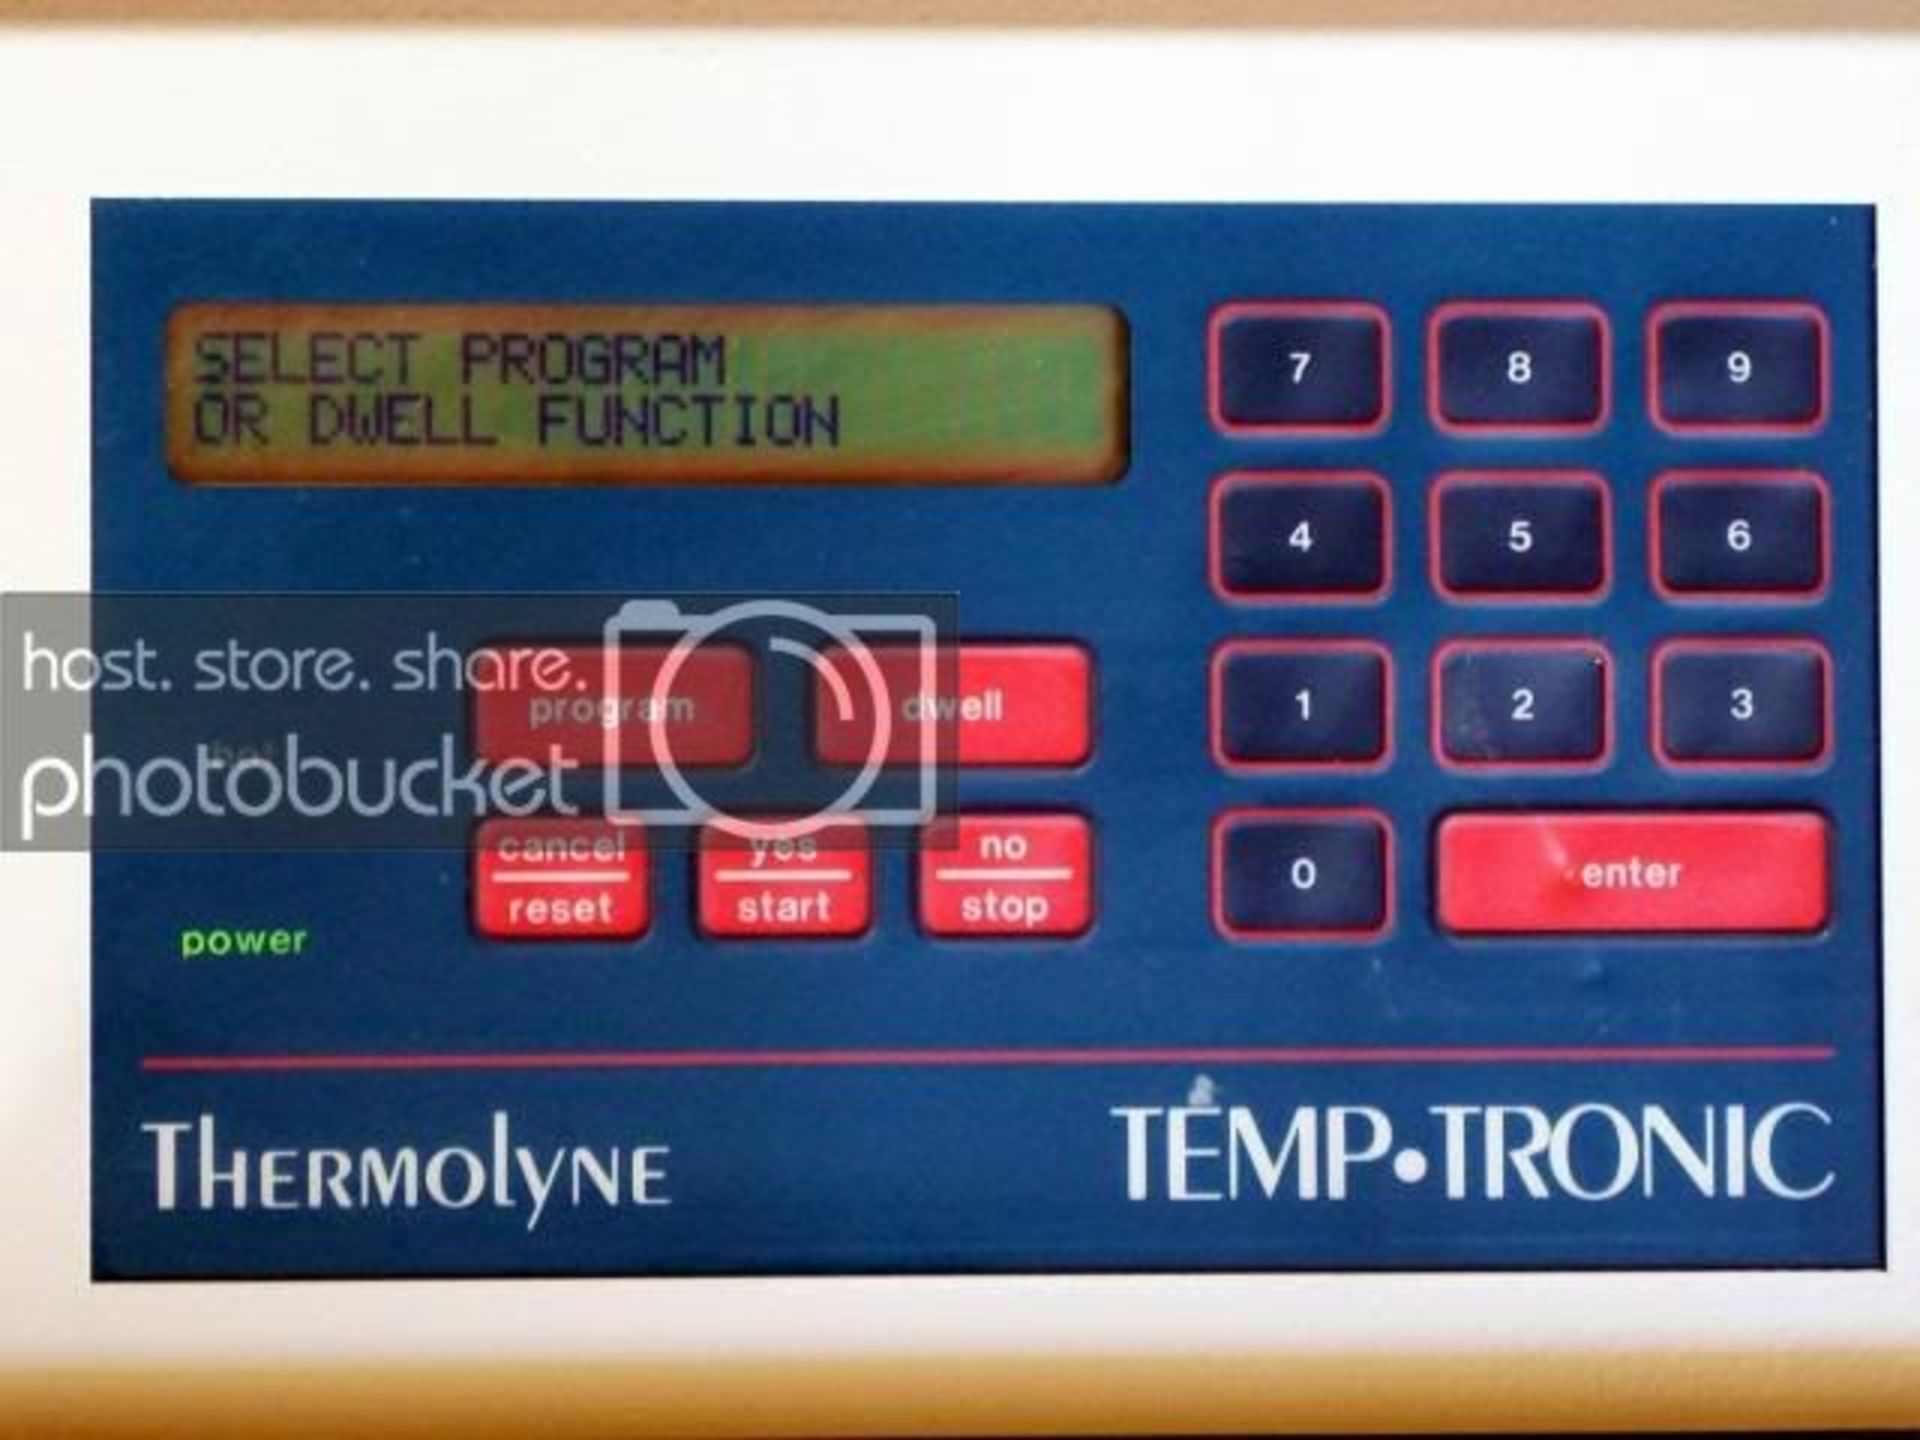 Thermolyne Temp-Tronic DB66925 DNA Thermal Cycler, Qty 1, 320394762884 - Image 5 of 9